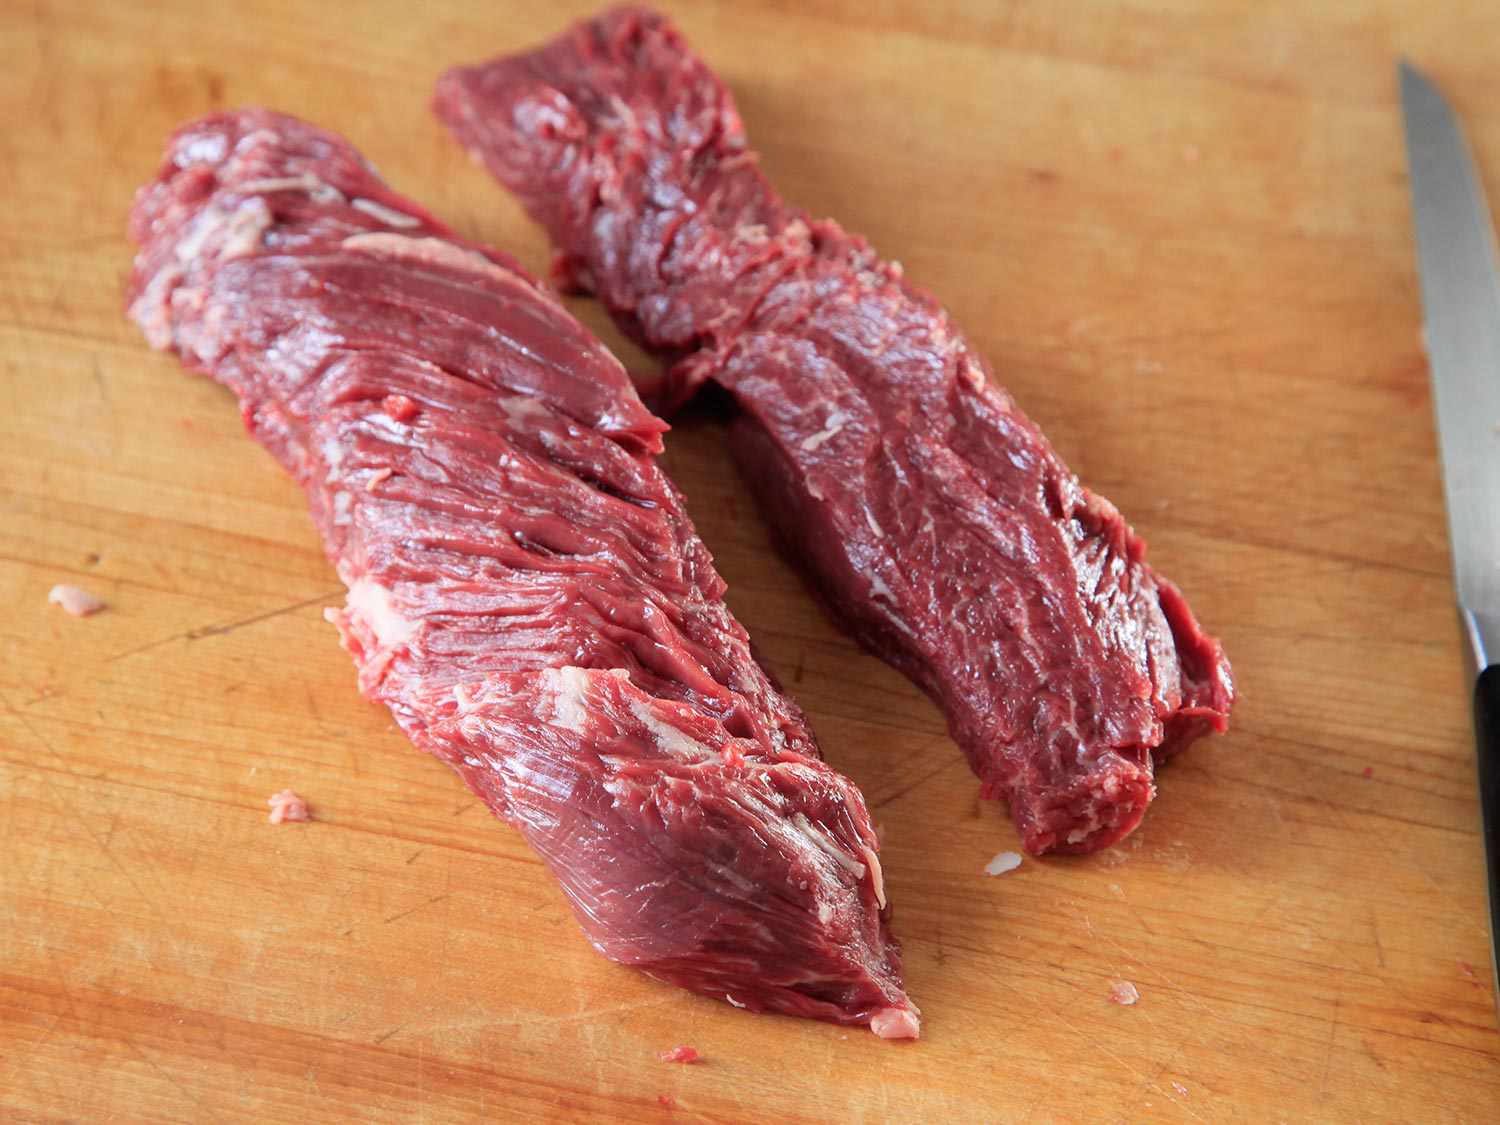 Two pieces of raw hanger steak on a wooden surface